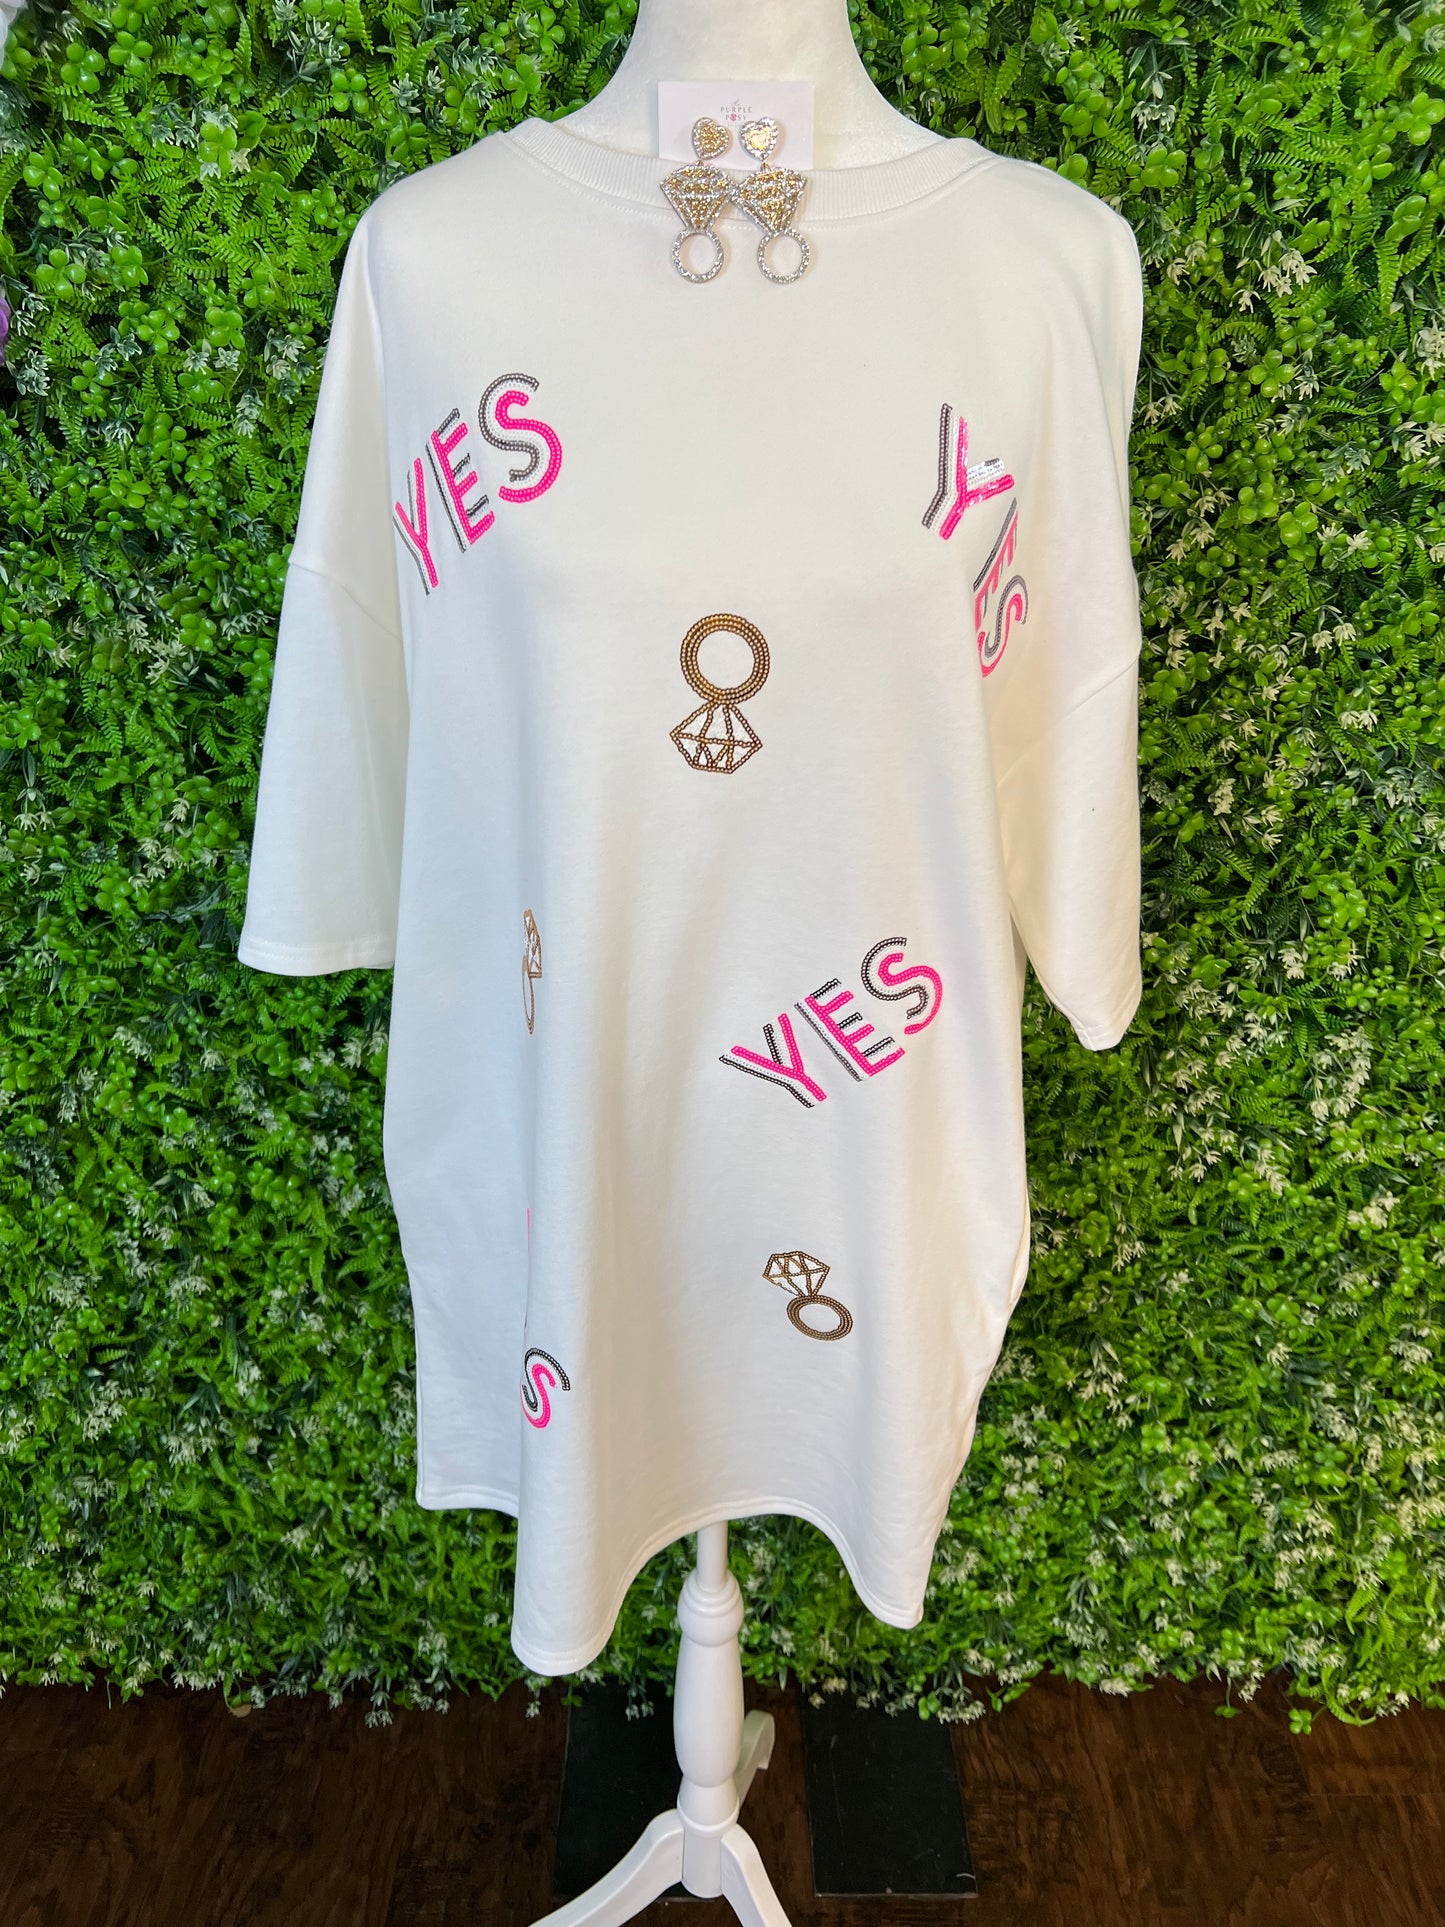 Bride to be "Yes" T-Shirt Dress